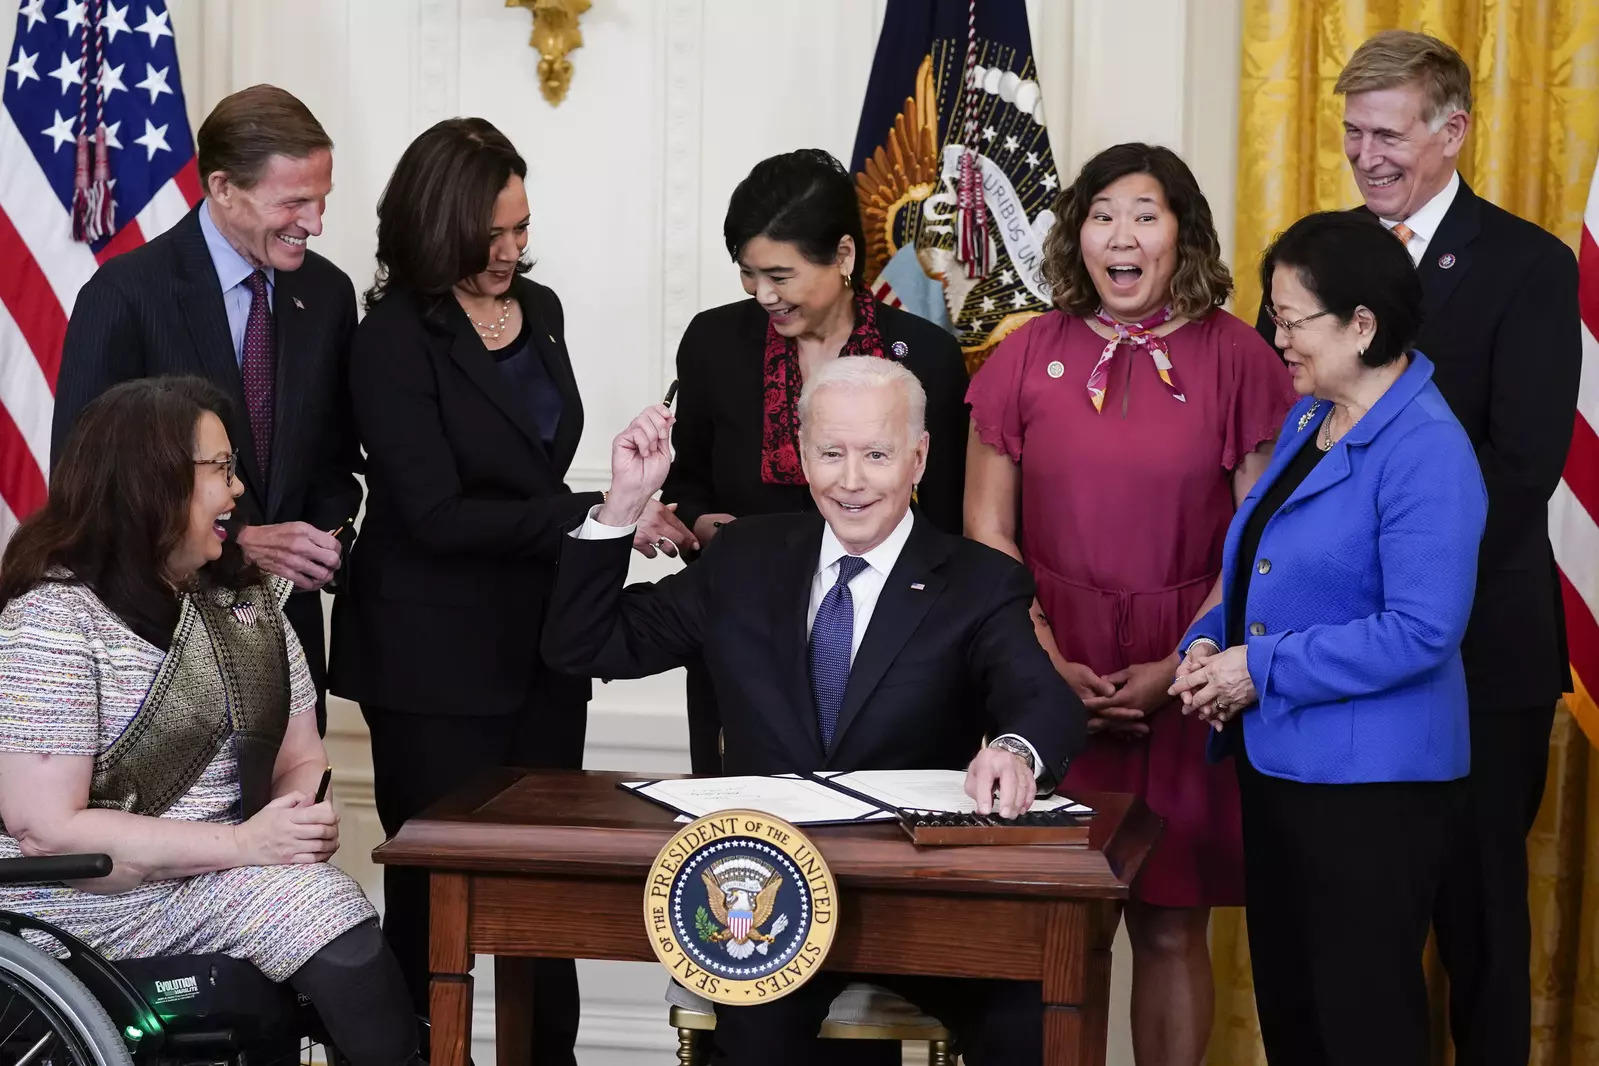 President Joe Biden hands out a pen after signing the Covid-19 Hate Crimes Act, in the East Room of the White House.